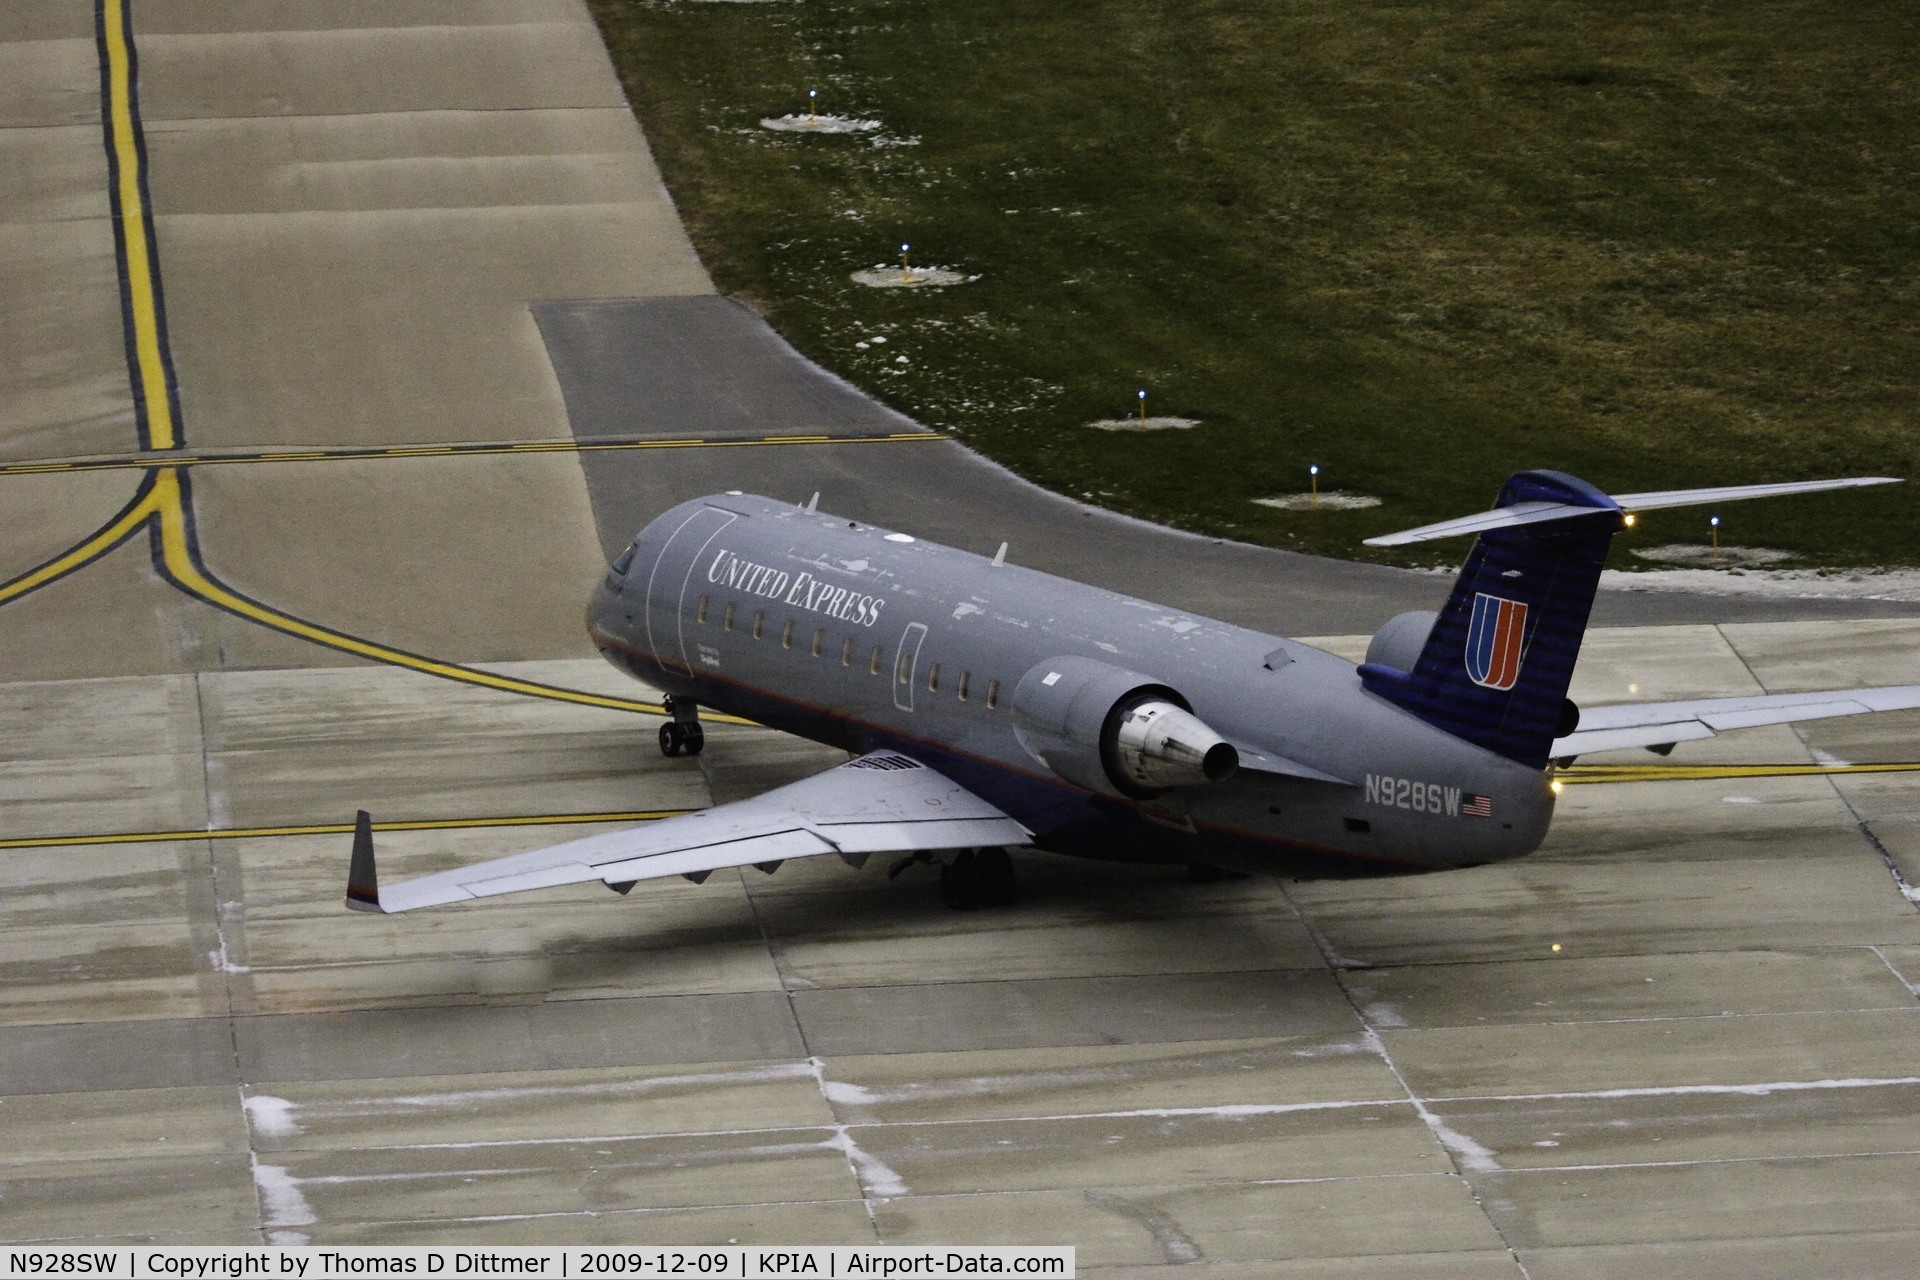 N928SW, 2002 Bombardier CRJ-200LR (CL-600-2B19) C/N 7701, United Express (N928SW) de-icing completed, taxies from the gate